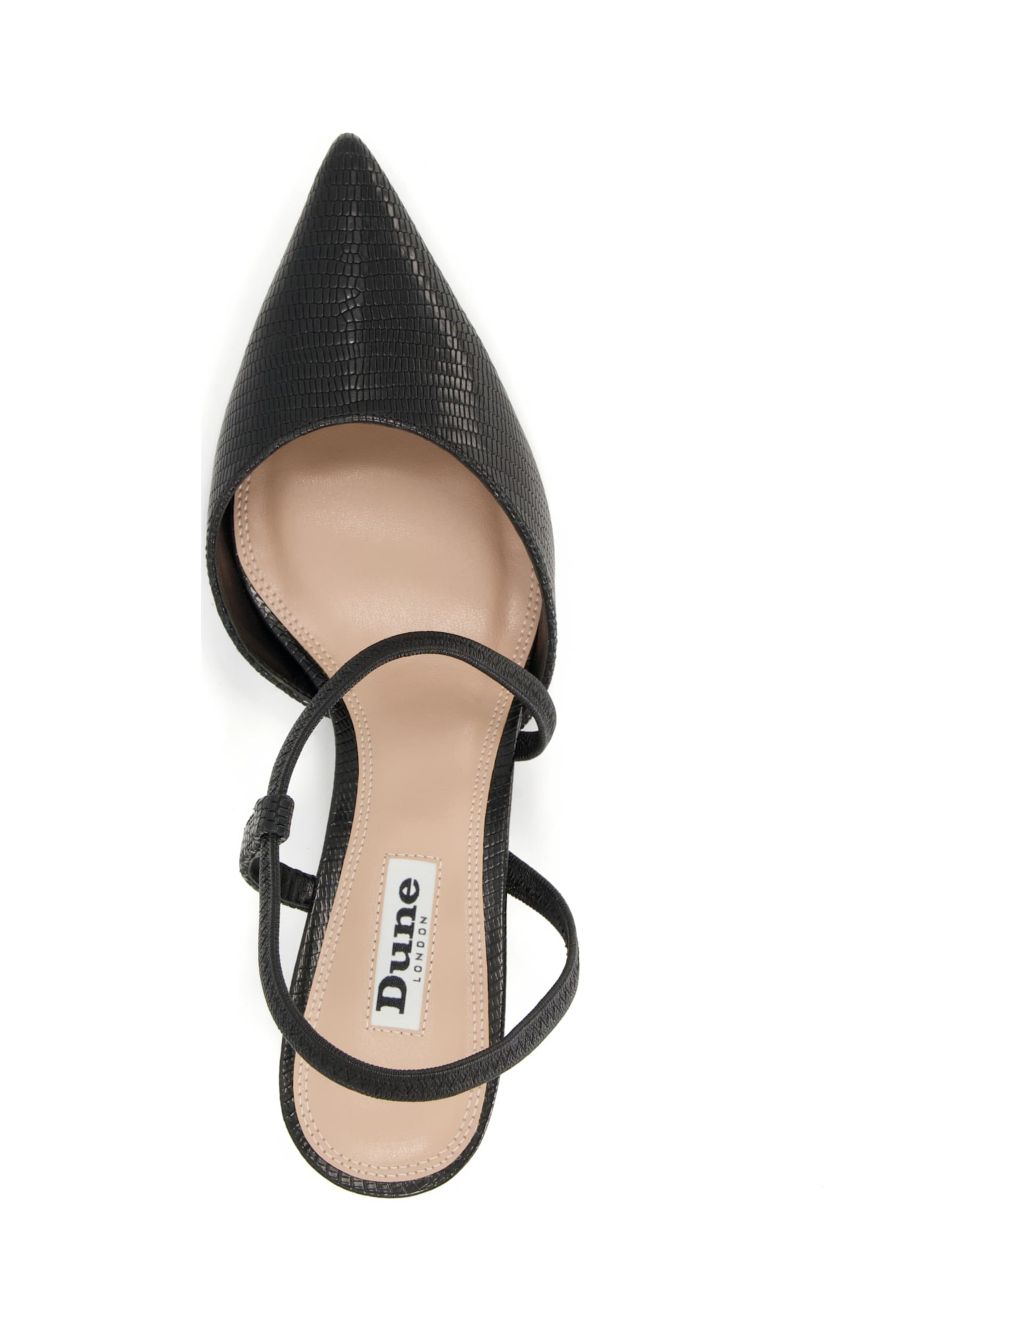 Kitten Heel Pointed Court Shoes image 3